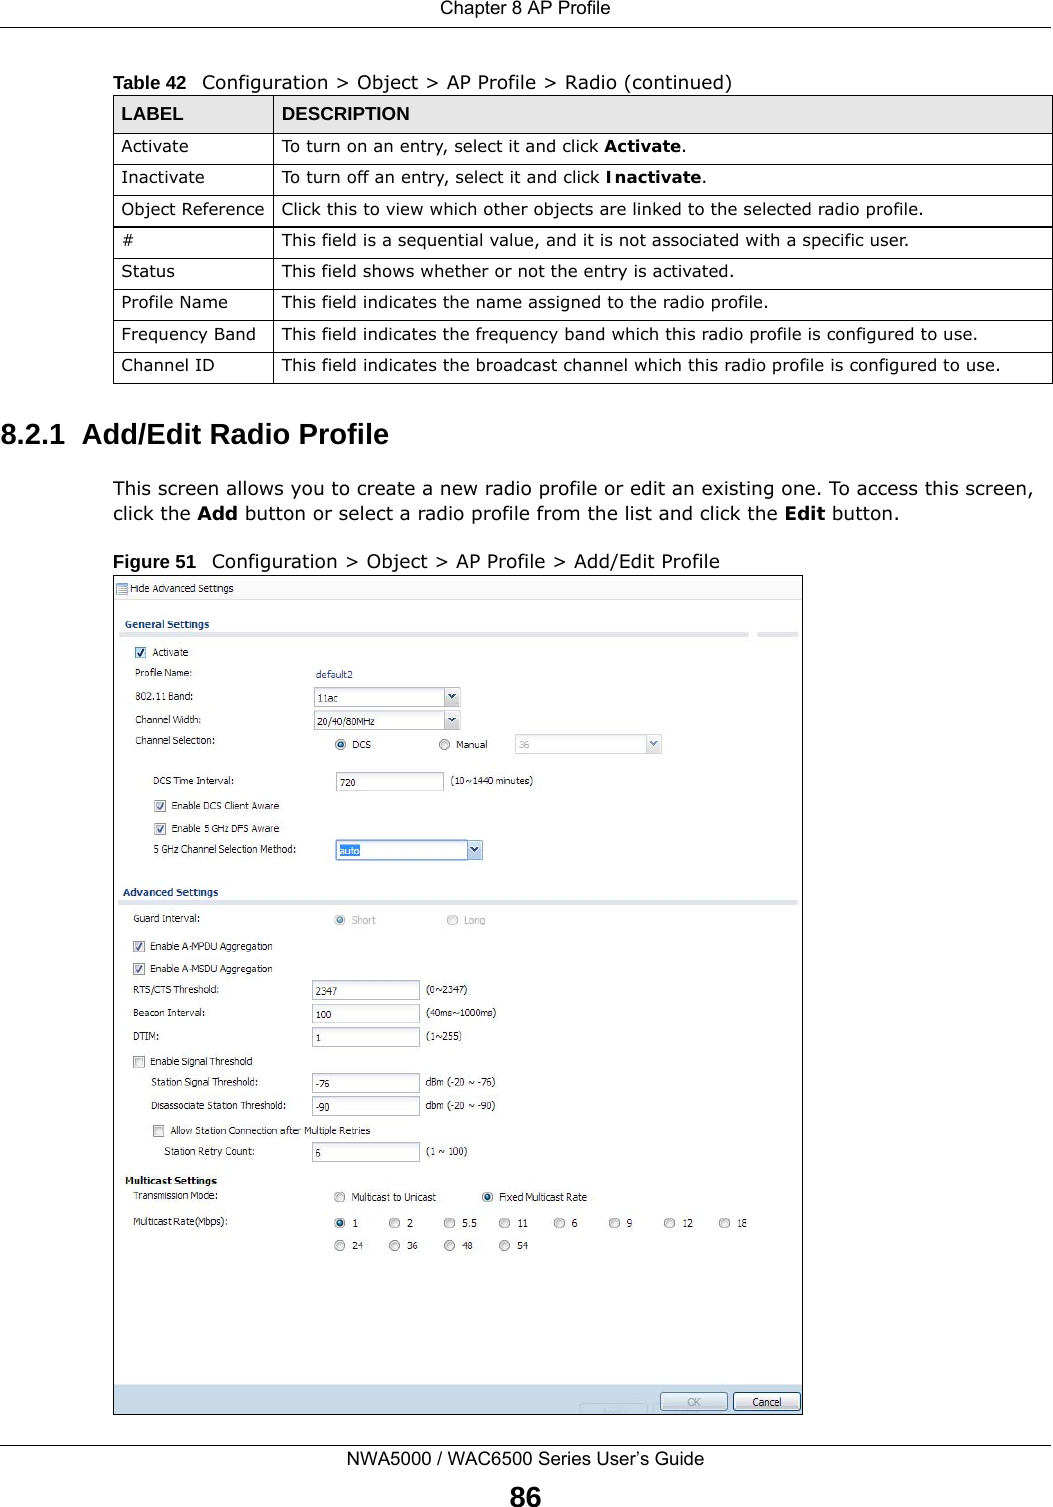 Chapter 8 AP ProfileNWA5000 / WAC6500 Series User’s Guide868.2.1  Add/Edit Radio ProfileThis screen allows you to create a new radio profile or edit an existing one. To access this screen, click the Add button or select a radio profile from the list and click the Edit button. Figure 51   Configuration &gt; Object &gt; AP Profile &gt; Add/Edit Profile Activate To turn on an entry, select it and click Activate.Inactivate To turn off an entry, select it and click Inactivate.Object Reference Click this to view which other objects are linked to the selected radio profile.# This field is a sequential value, and it is not associated with a specific user.Status This field shows whether or not the entry is activated.Profile Name This field indicates the name assigned to the radio profile.Frequency Band This field indicates the frequency band which this radio profile is configured to use.Channel ID This field indicates the broadcast channel which this radio profile is configured to use.Table 42   Configuration &gt; Object &gt; AP Profile &gt; Radio (continued)LABEL DESCRIPTION